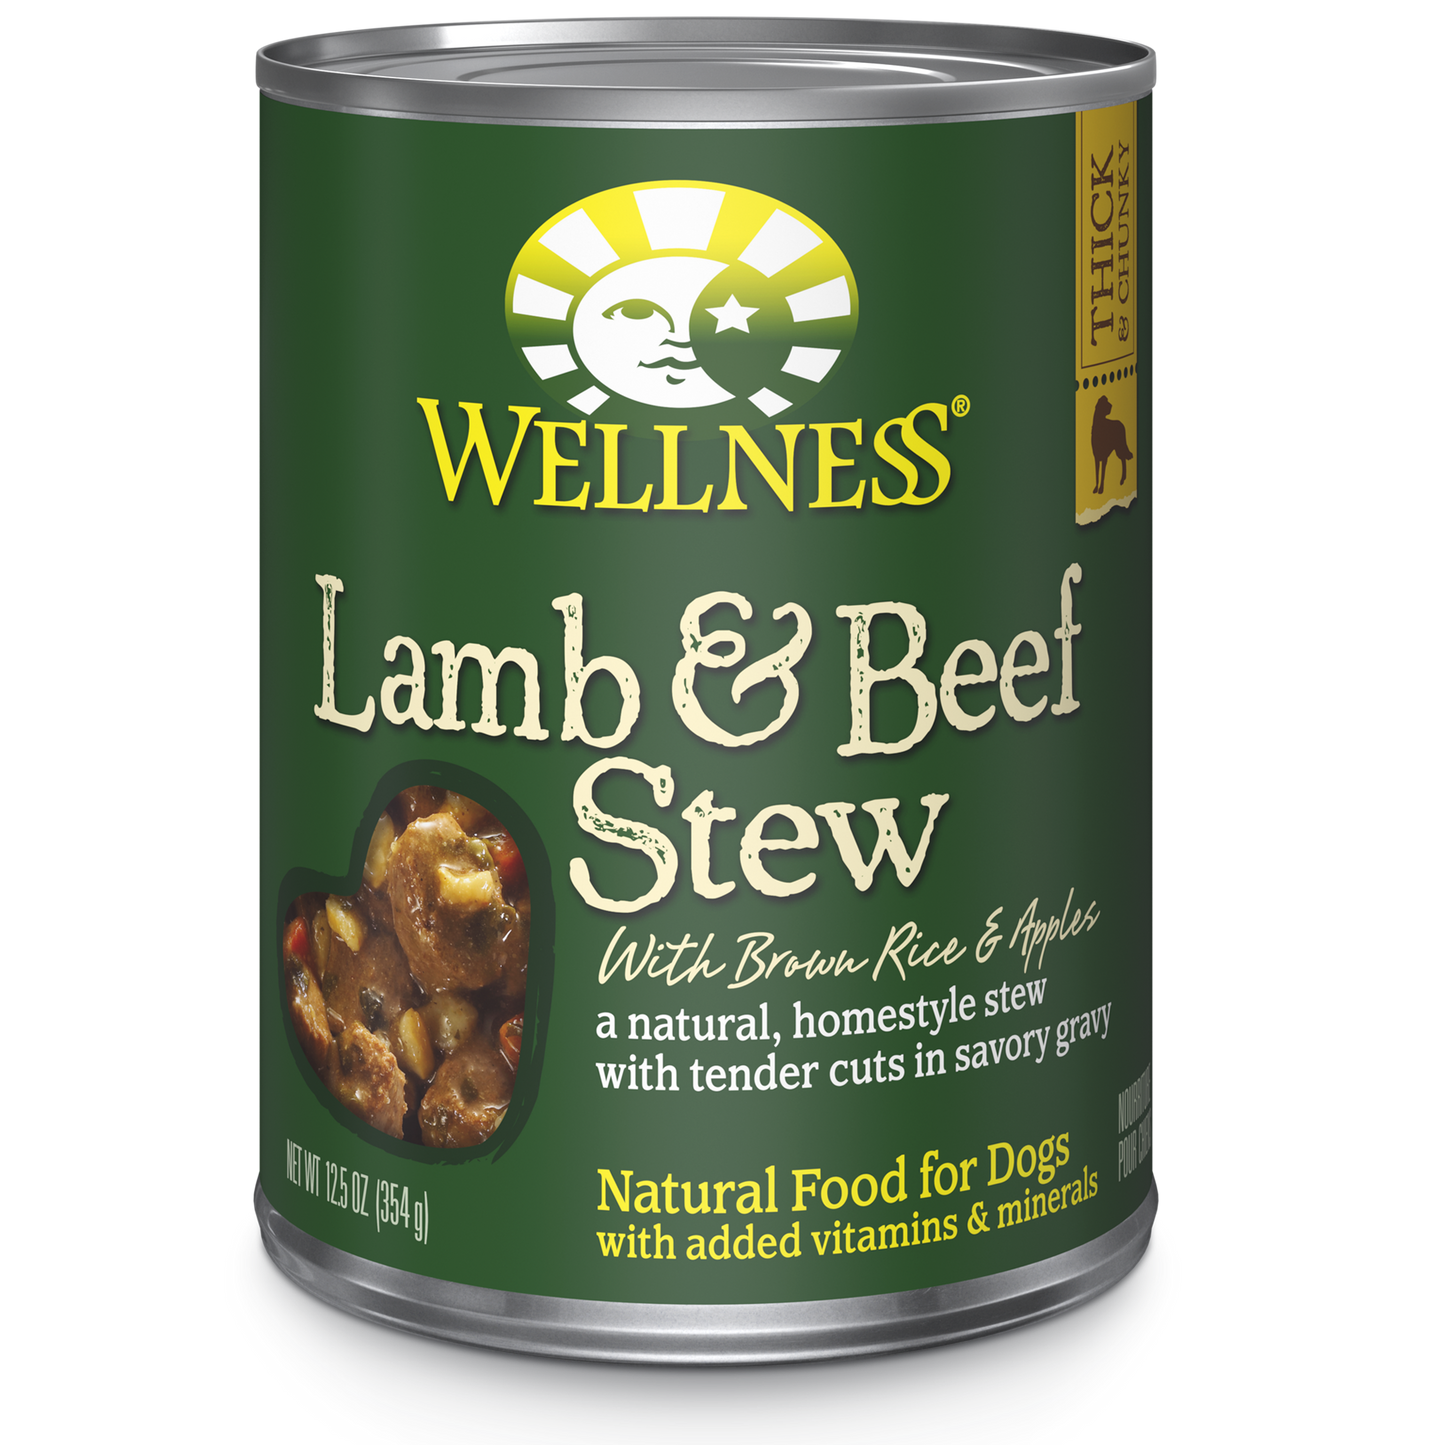 Wellness Premium Canned Dog Food | Homestyle Stew in Gravy | Lamb & Beef Stew with Brown Rice & Apples Recipe | 12.5 oz. Can